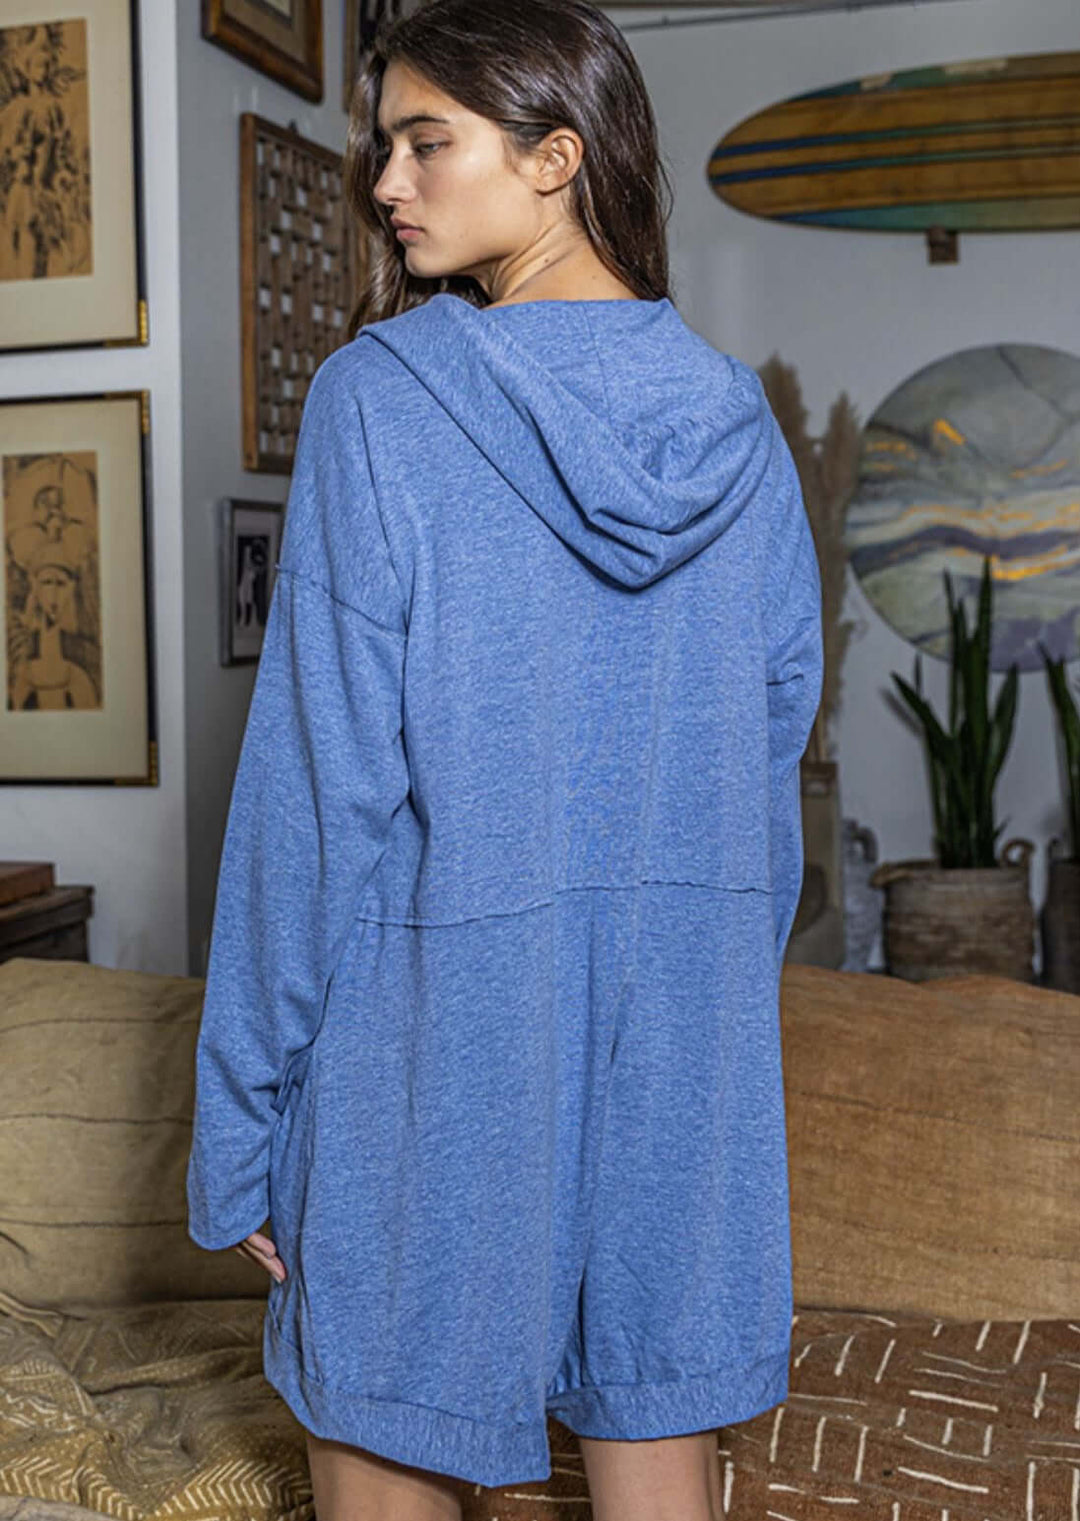 Bucket List Style# R5348 | Women's Bucket List Cotton Slub Fabric Slouchy Long Sleeve Blue Romper | Made in USA | Classy Cozy Cool Women's Made in America Boutique